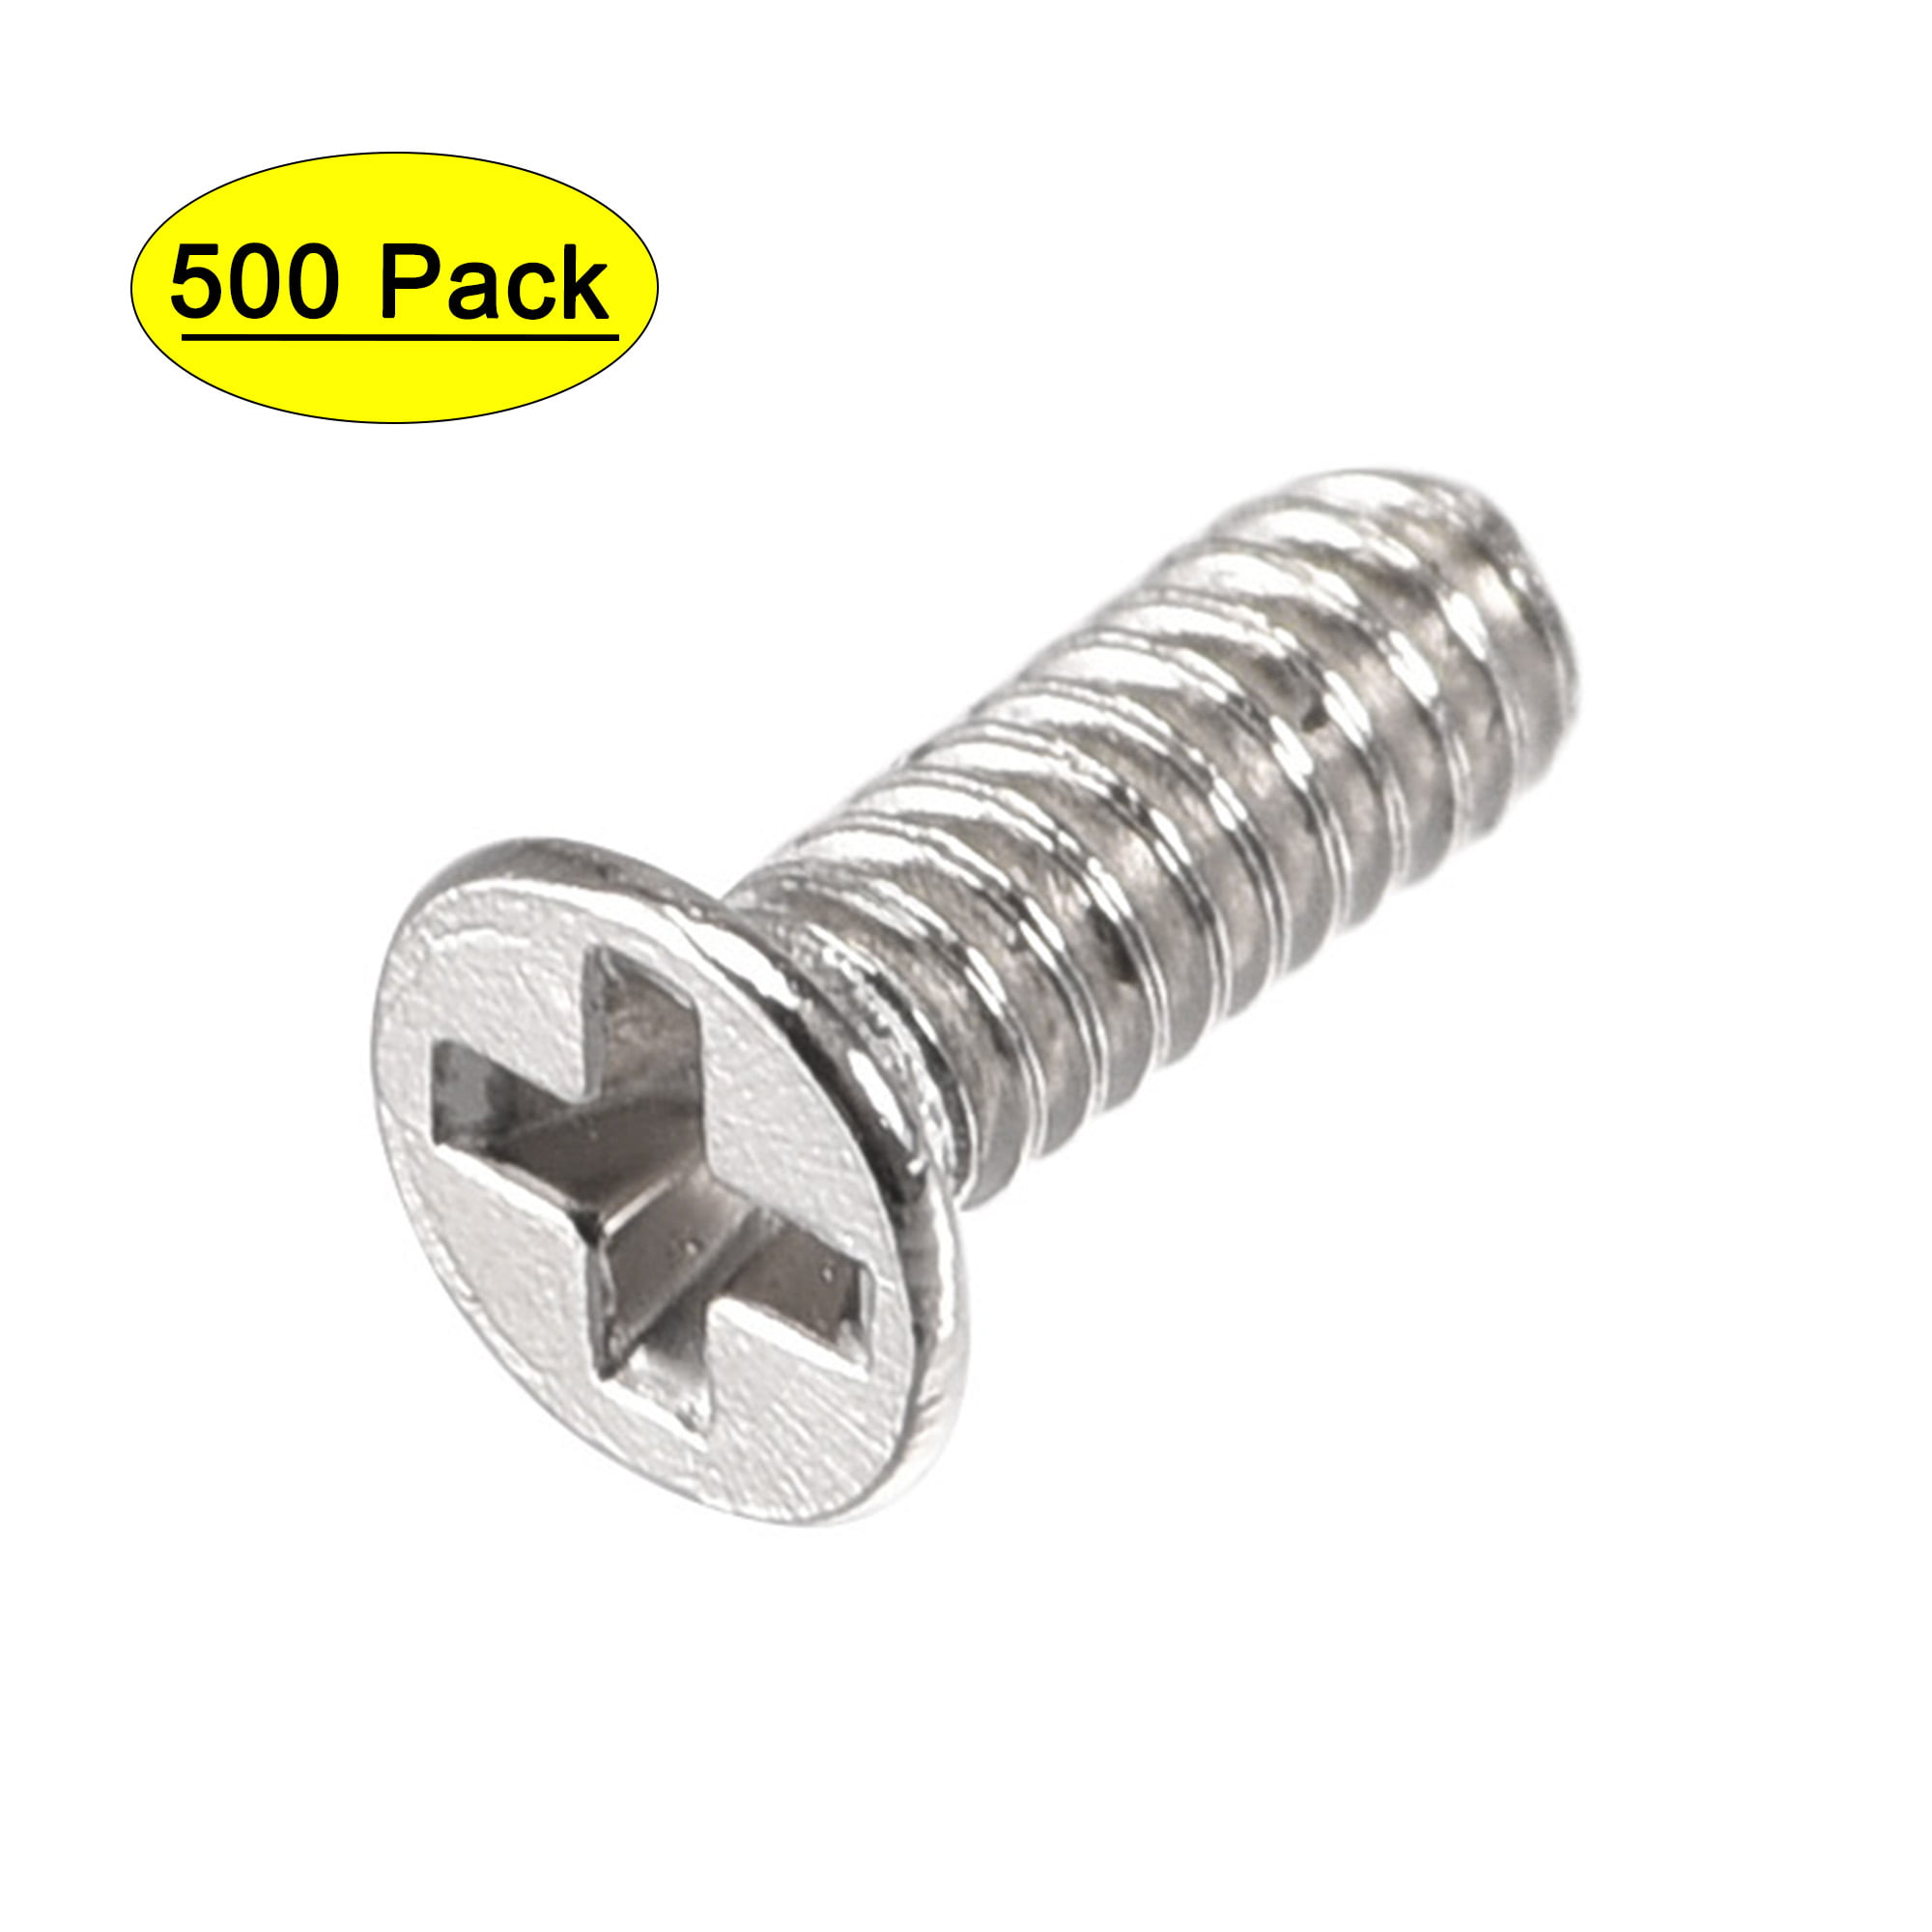 M1 x 4mm Nickel Plated Phillips Self-tapping Small Wood Screws 